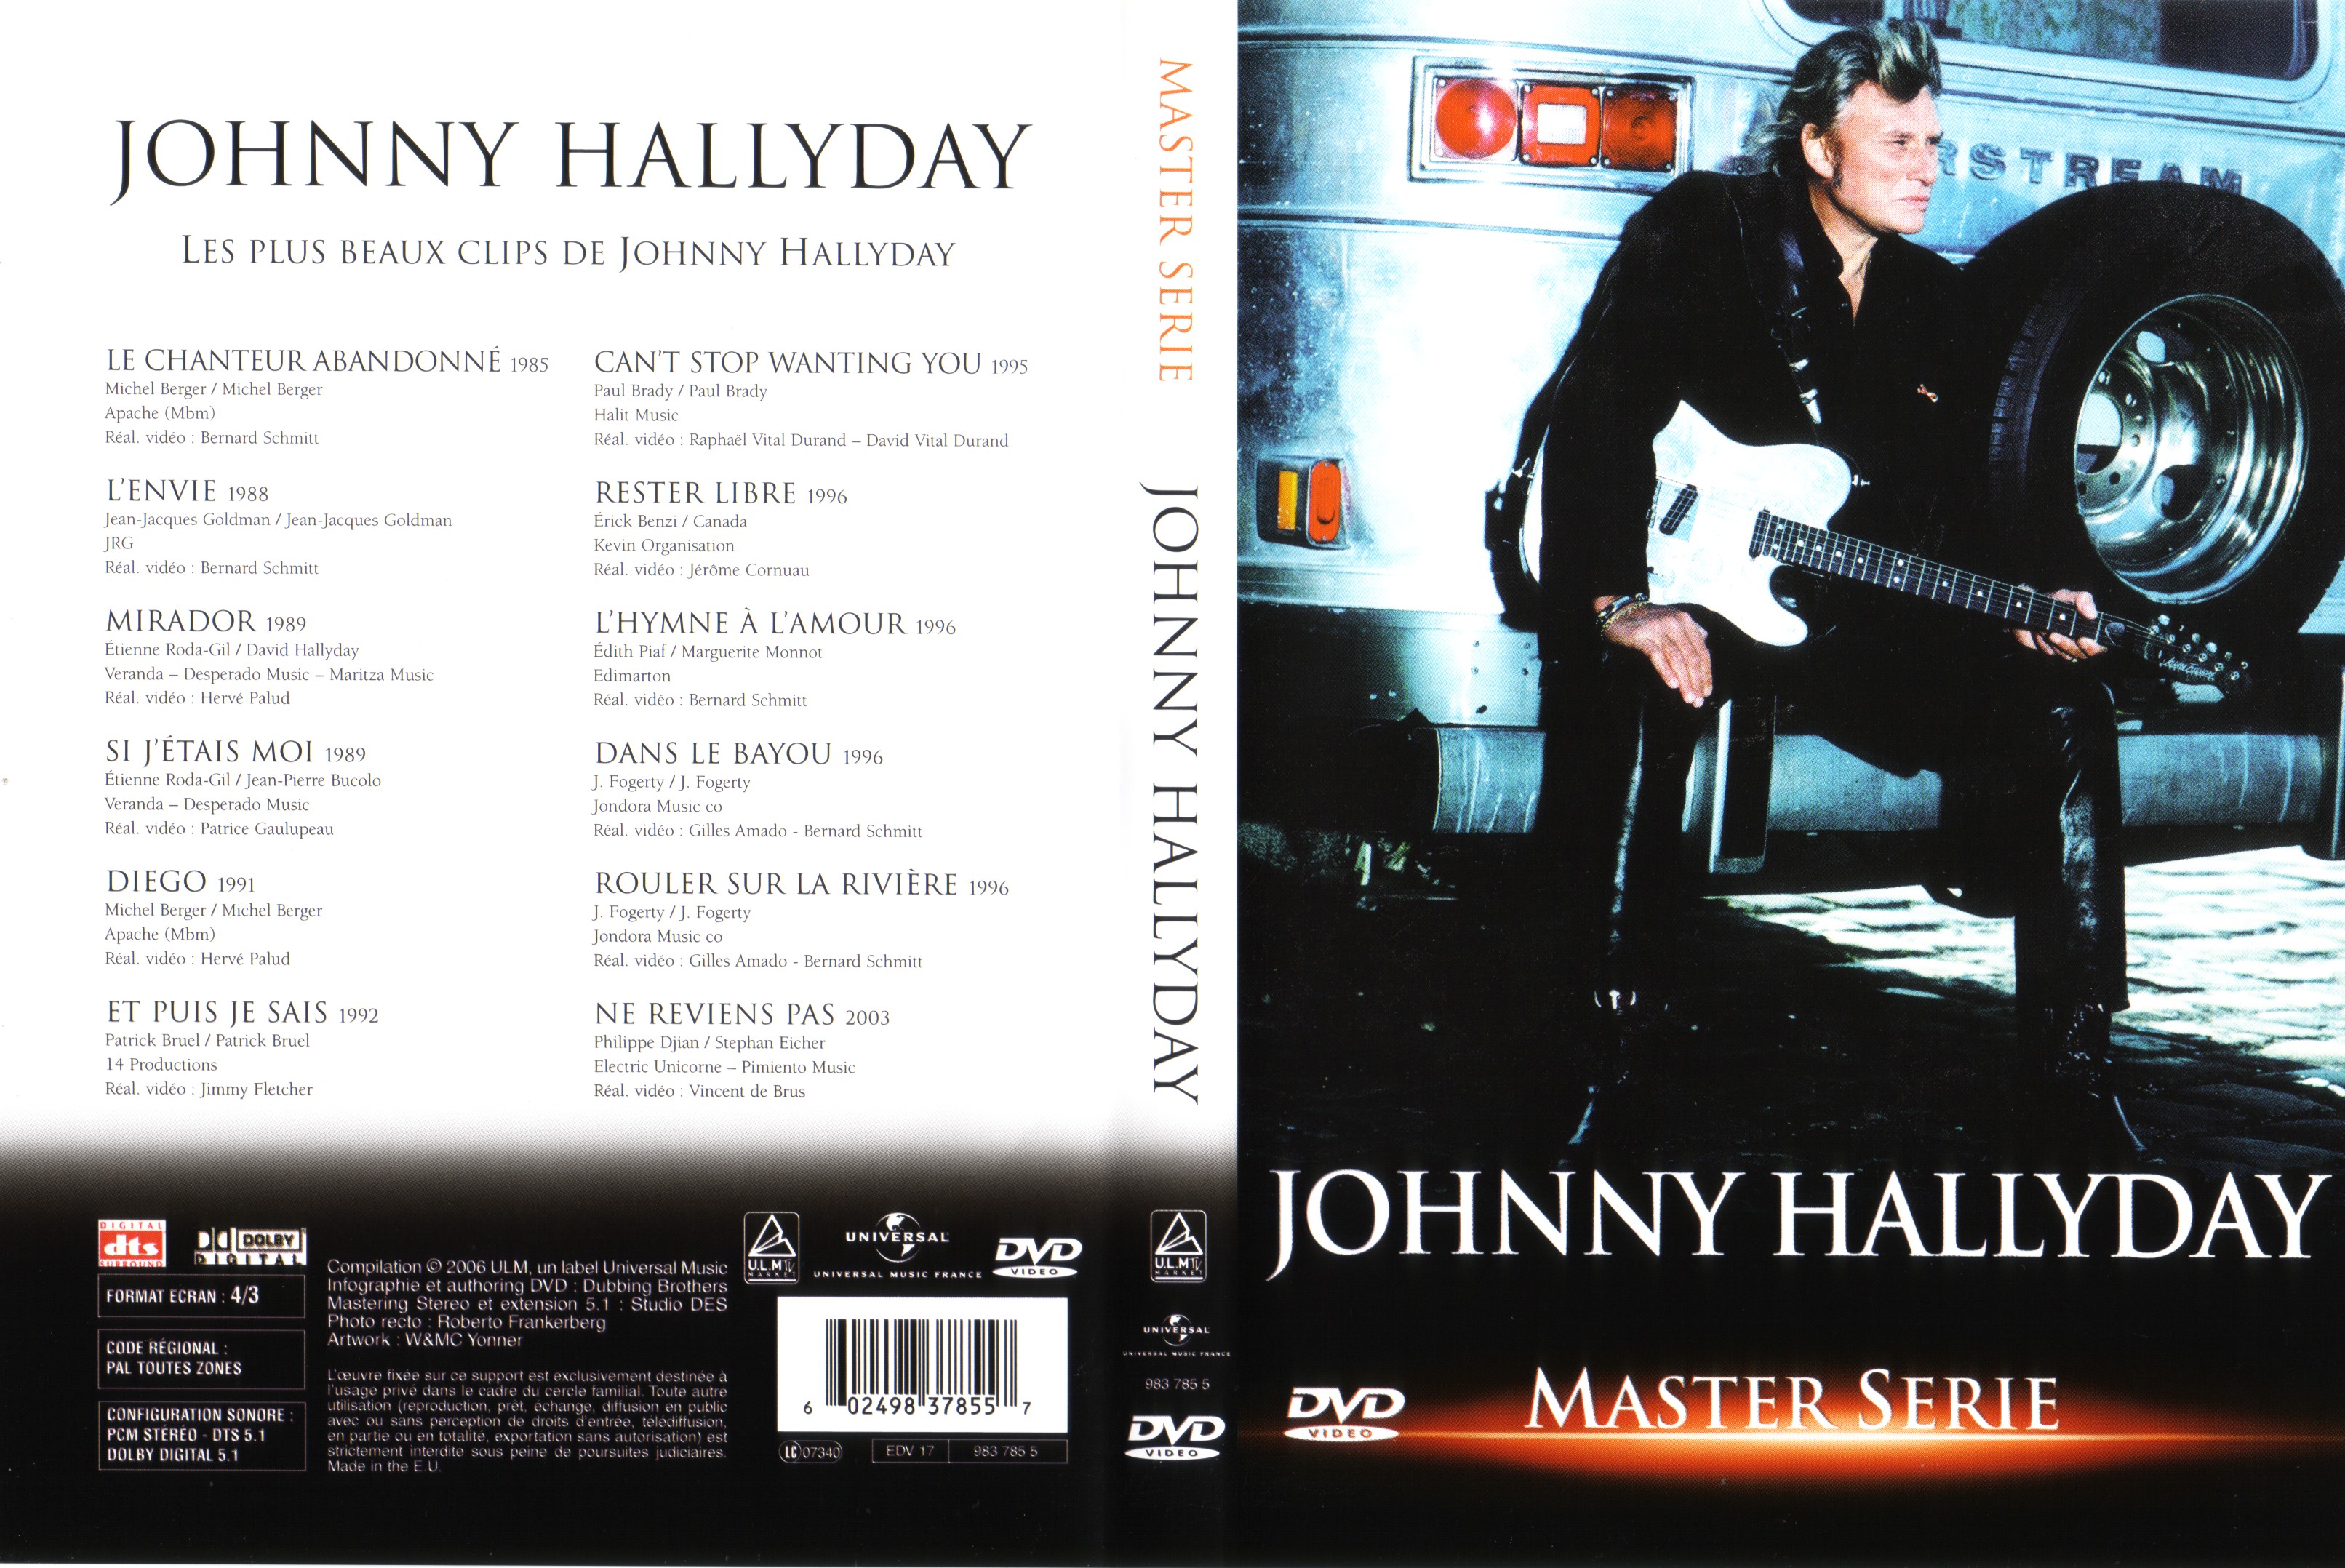 Jaquette DVD Johnny Hallyday Master Serie 2